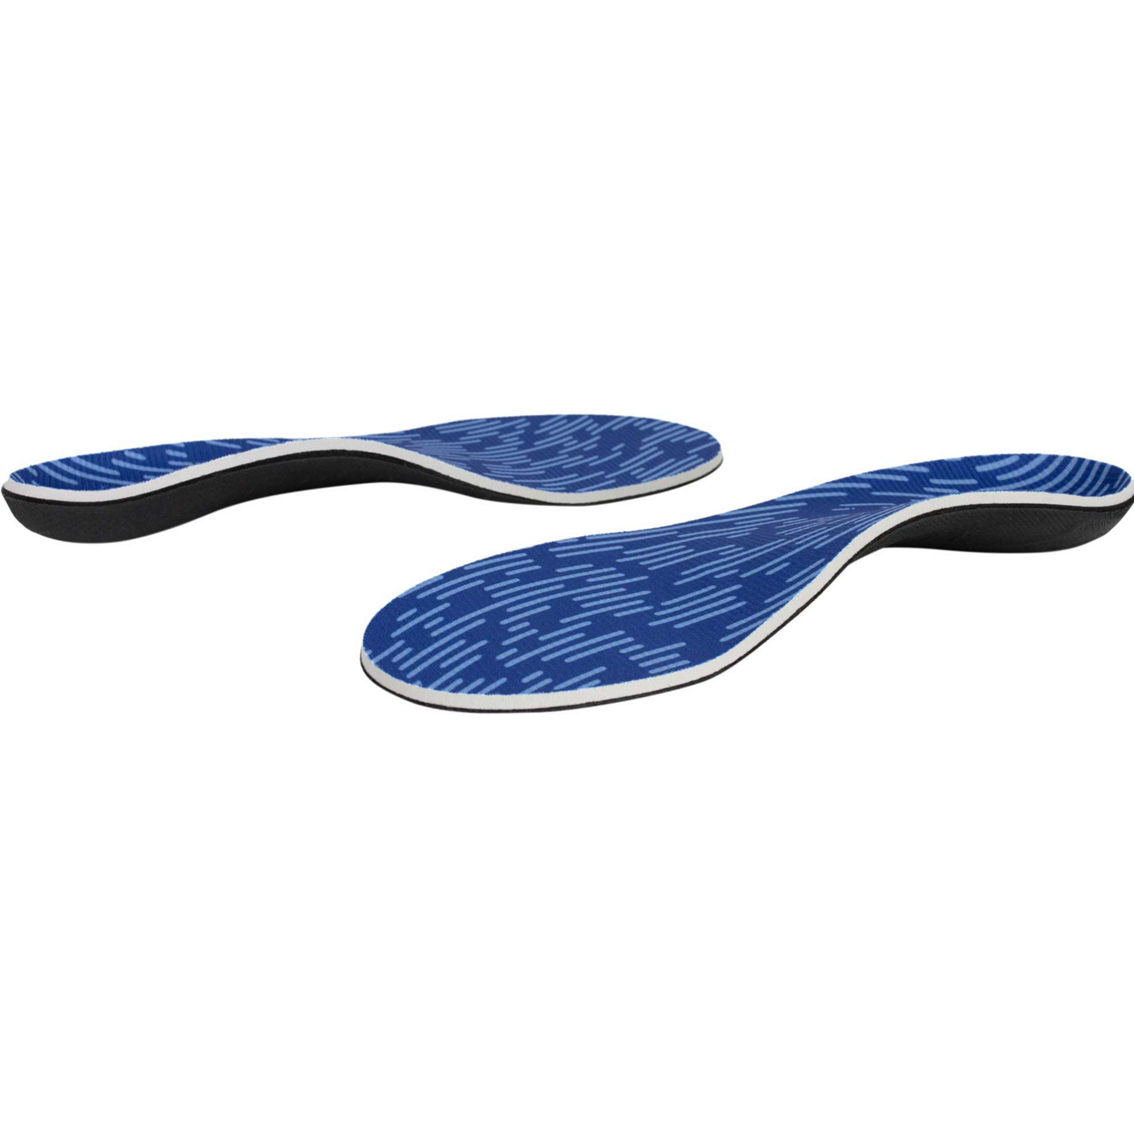 Powerstep Wide Fit Full Length Orthotic Shoe Insoles - Image 4 of 6